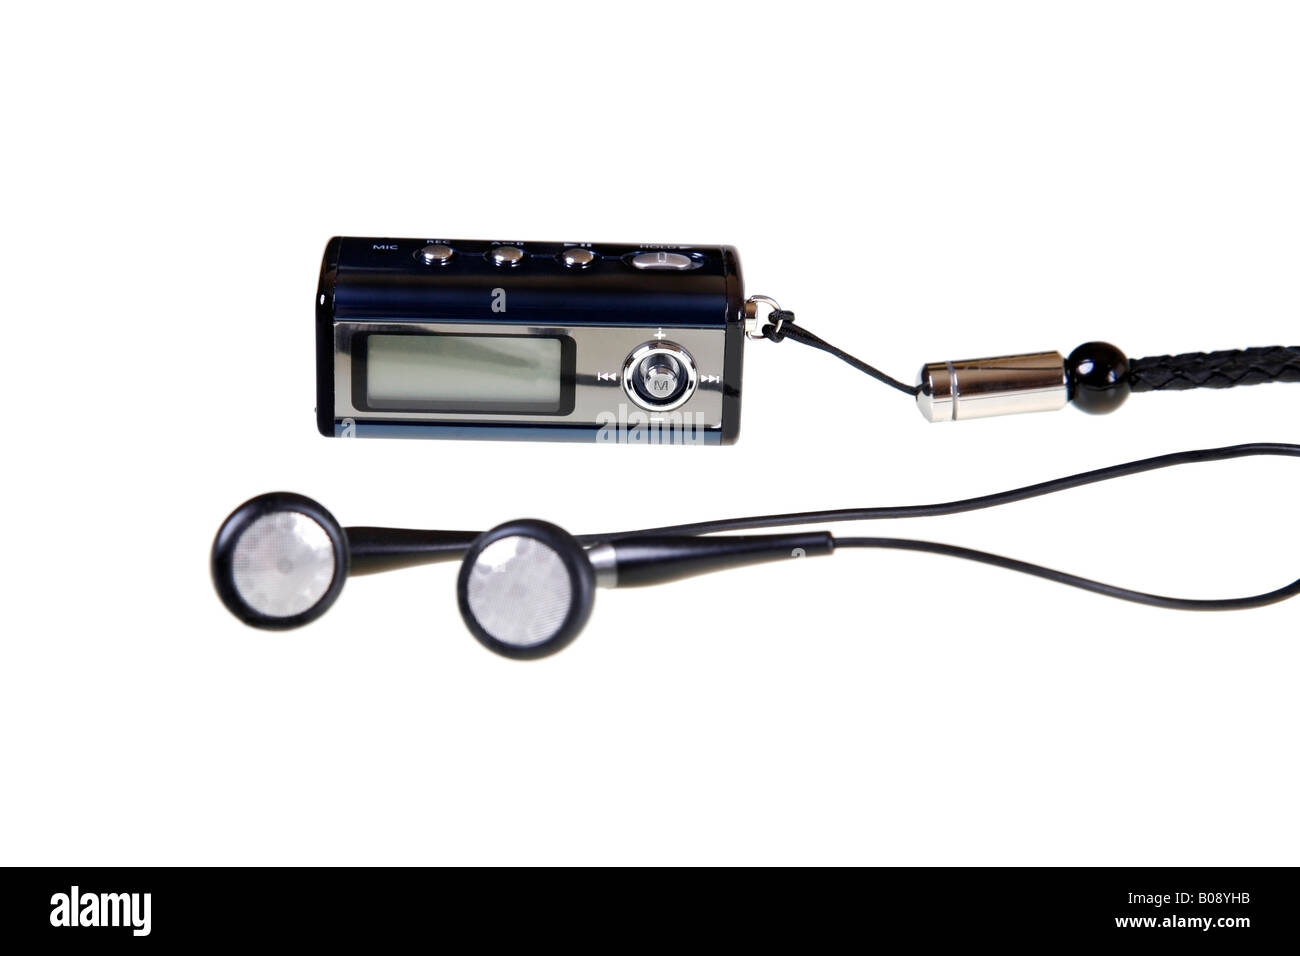 MP3 player, walkman with earphones (earbuds) and carrying strap, cutout Stock Photo